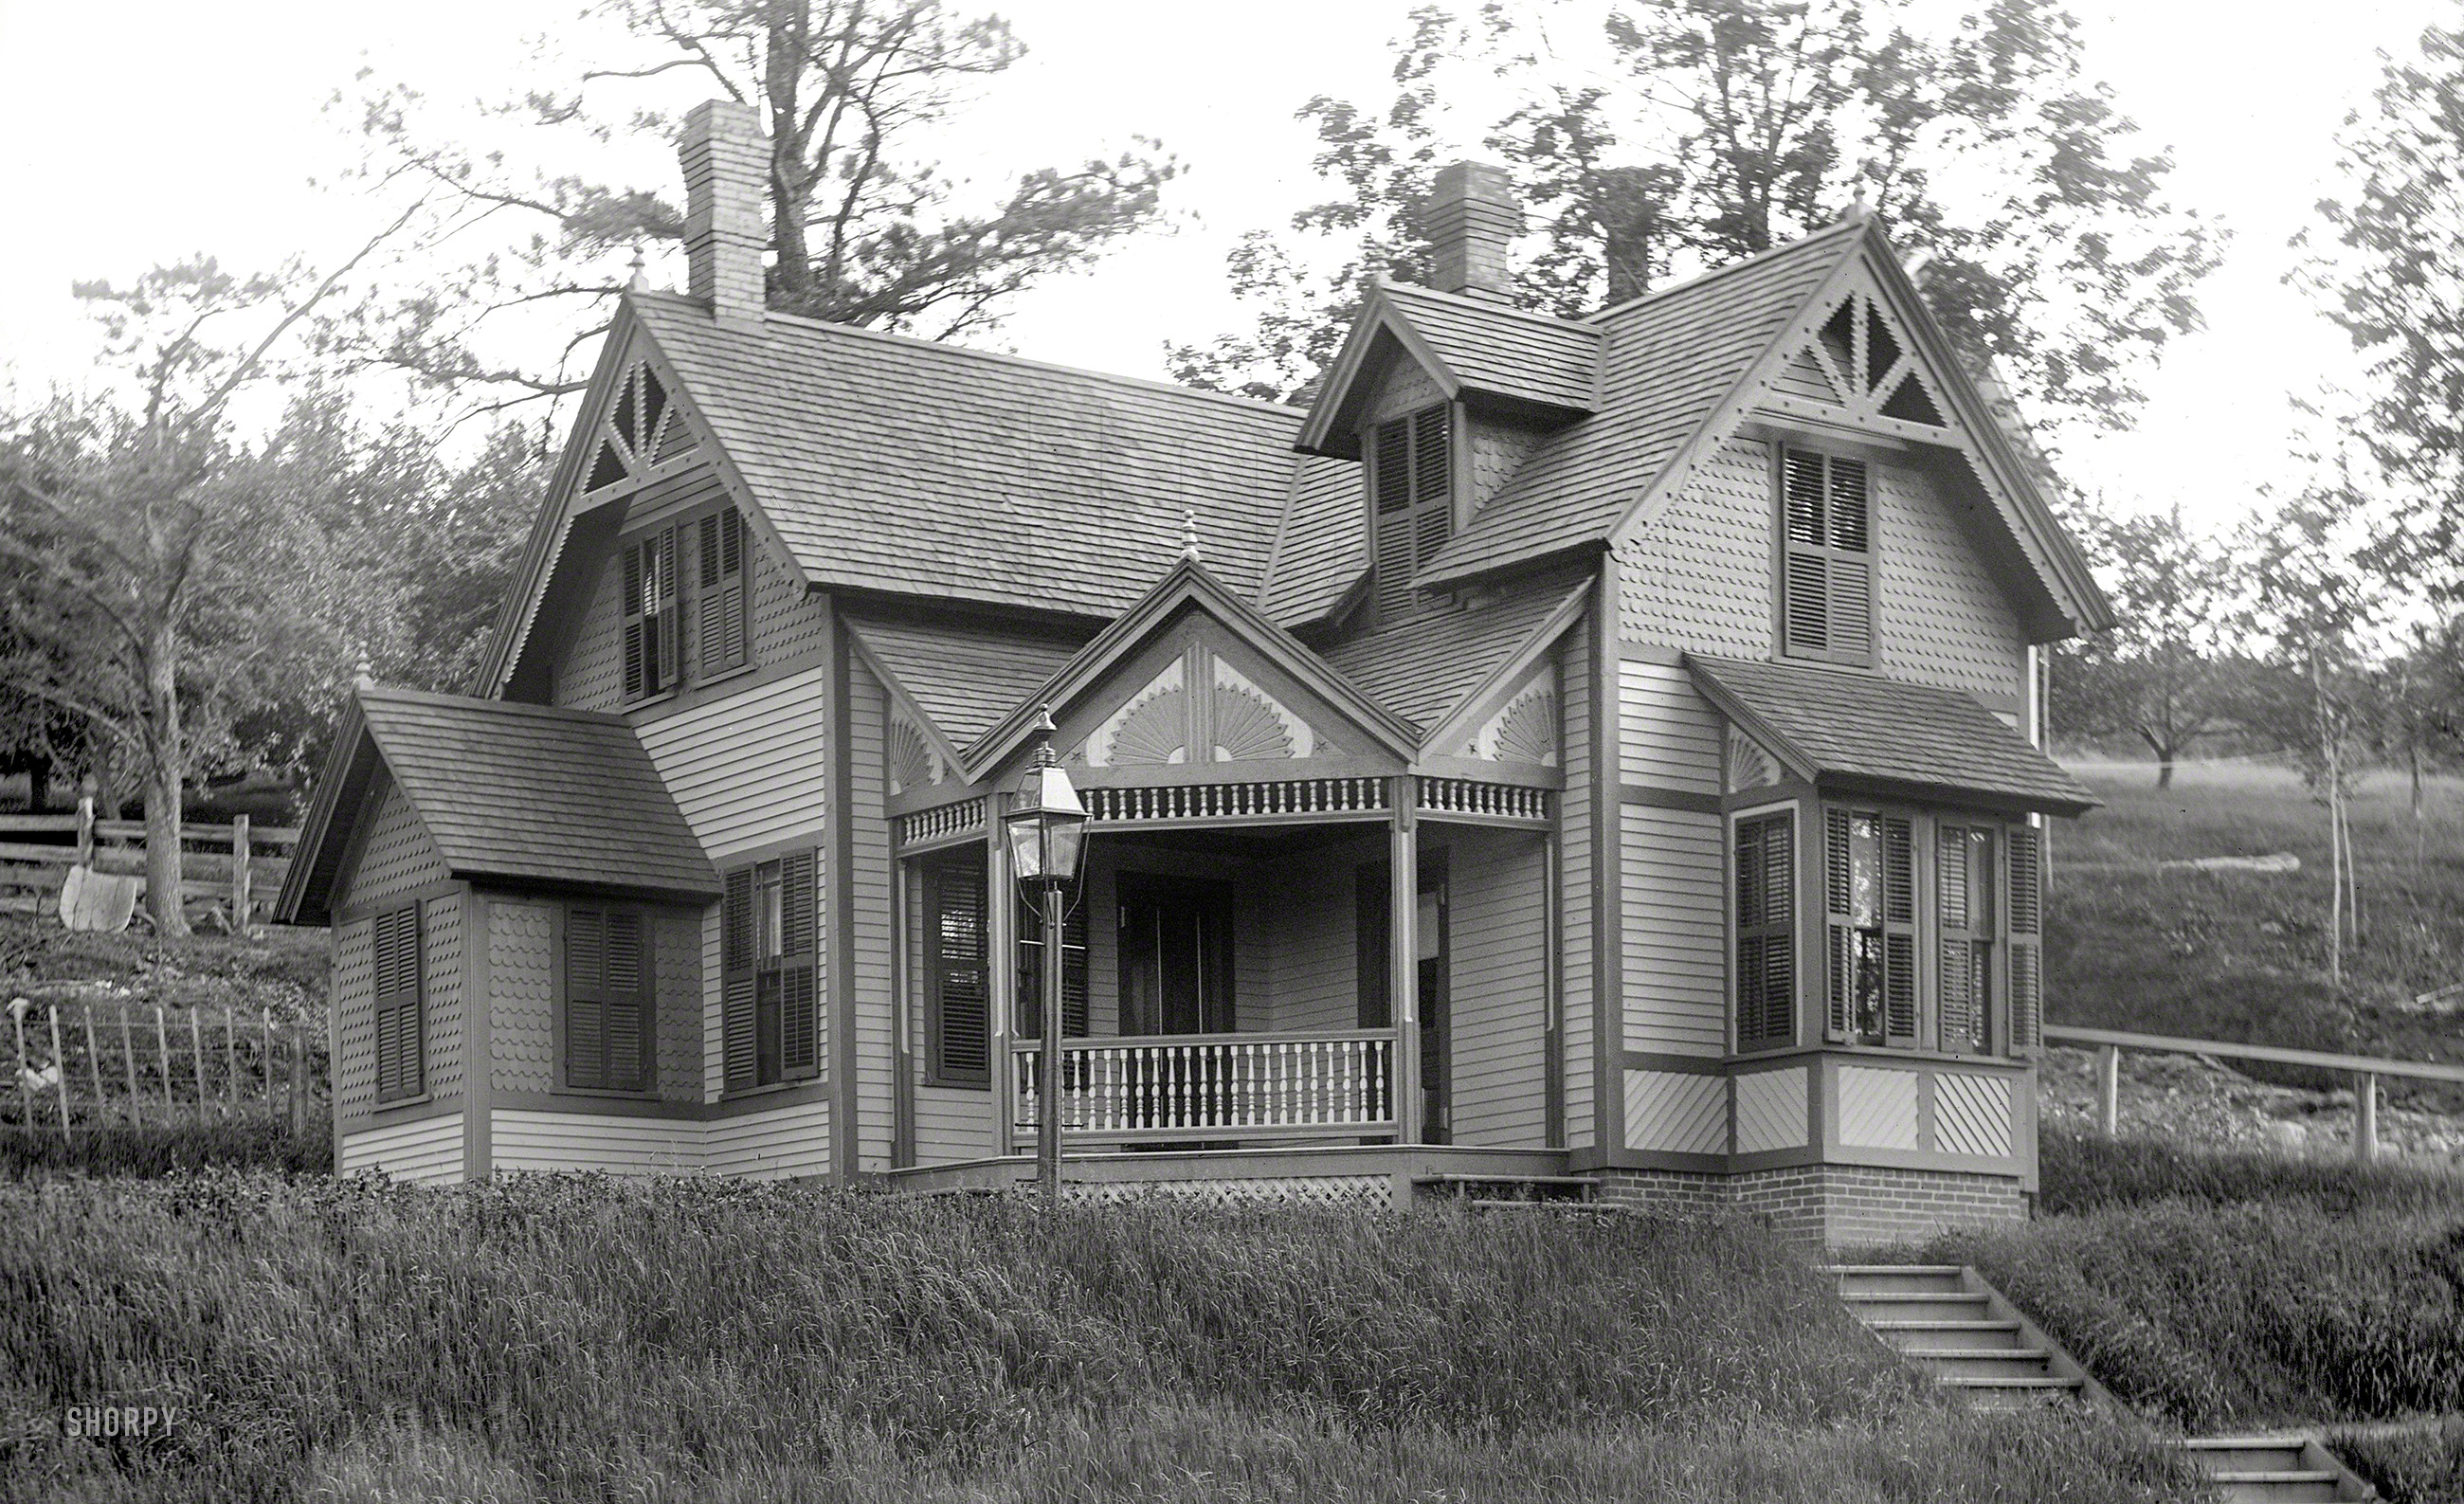 From around 1900 we bring you someone's new house in the vicinity of Stafford, Connecticut. Fancy millwork abounds! 5x8 glass negative. View full size.